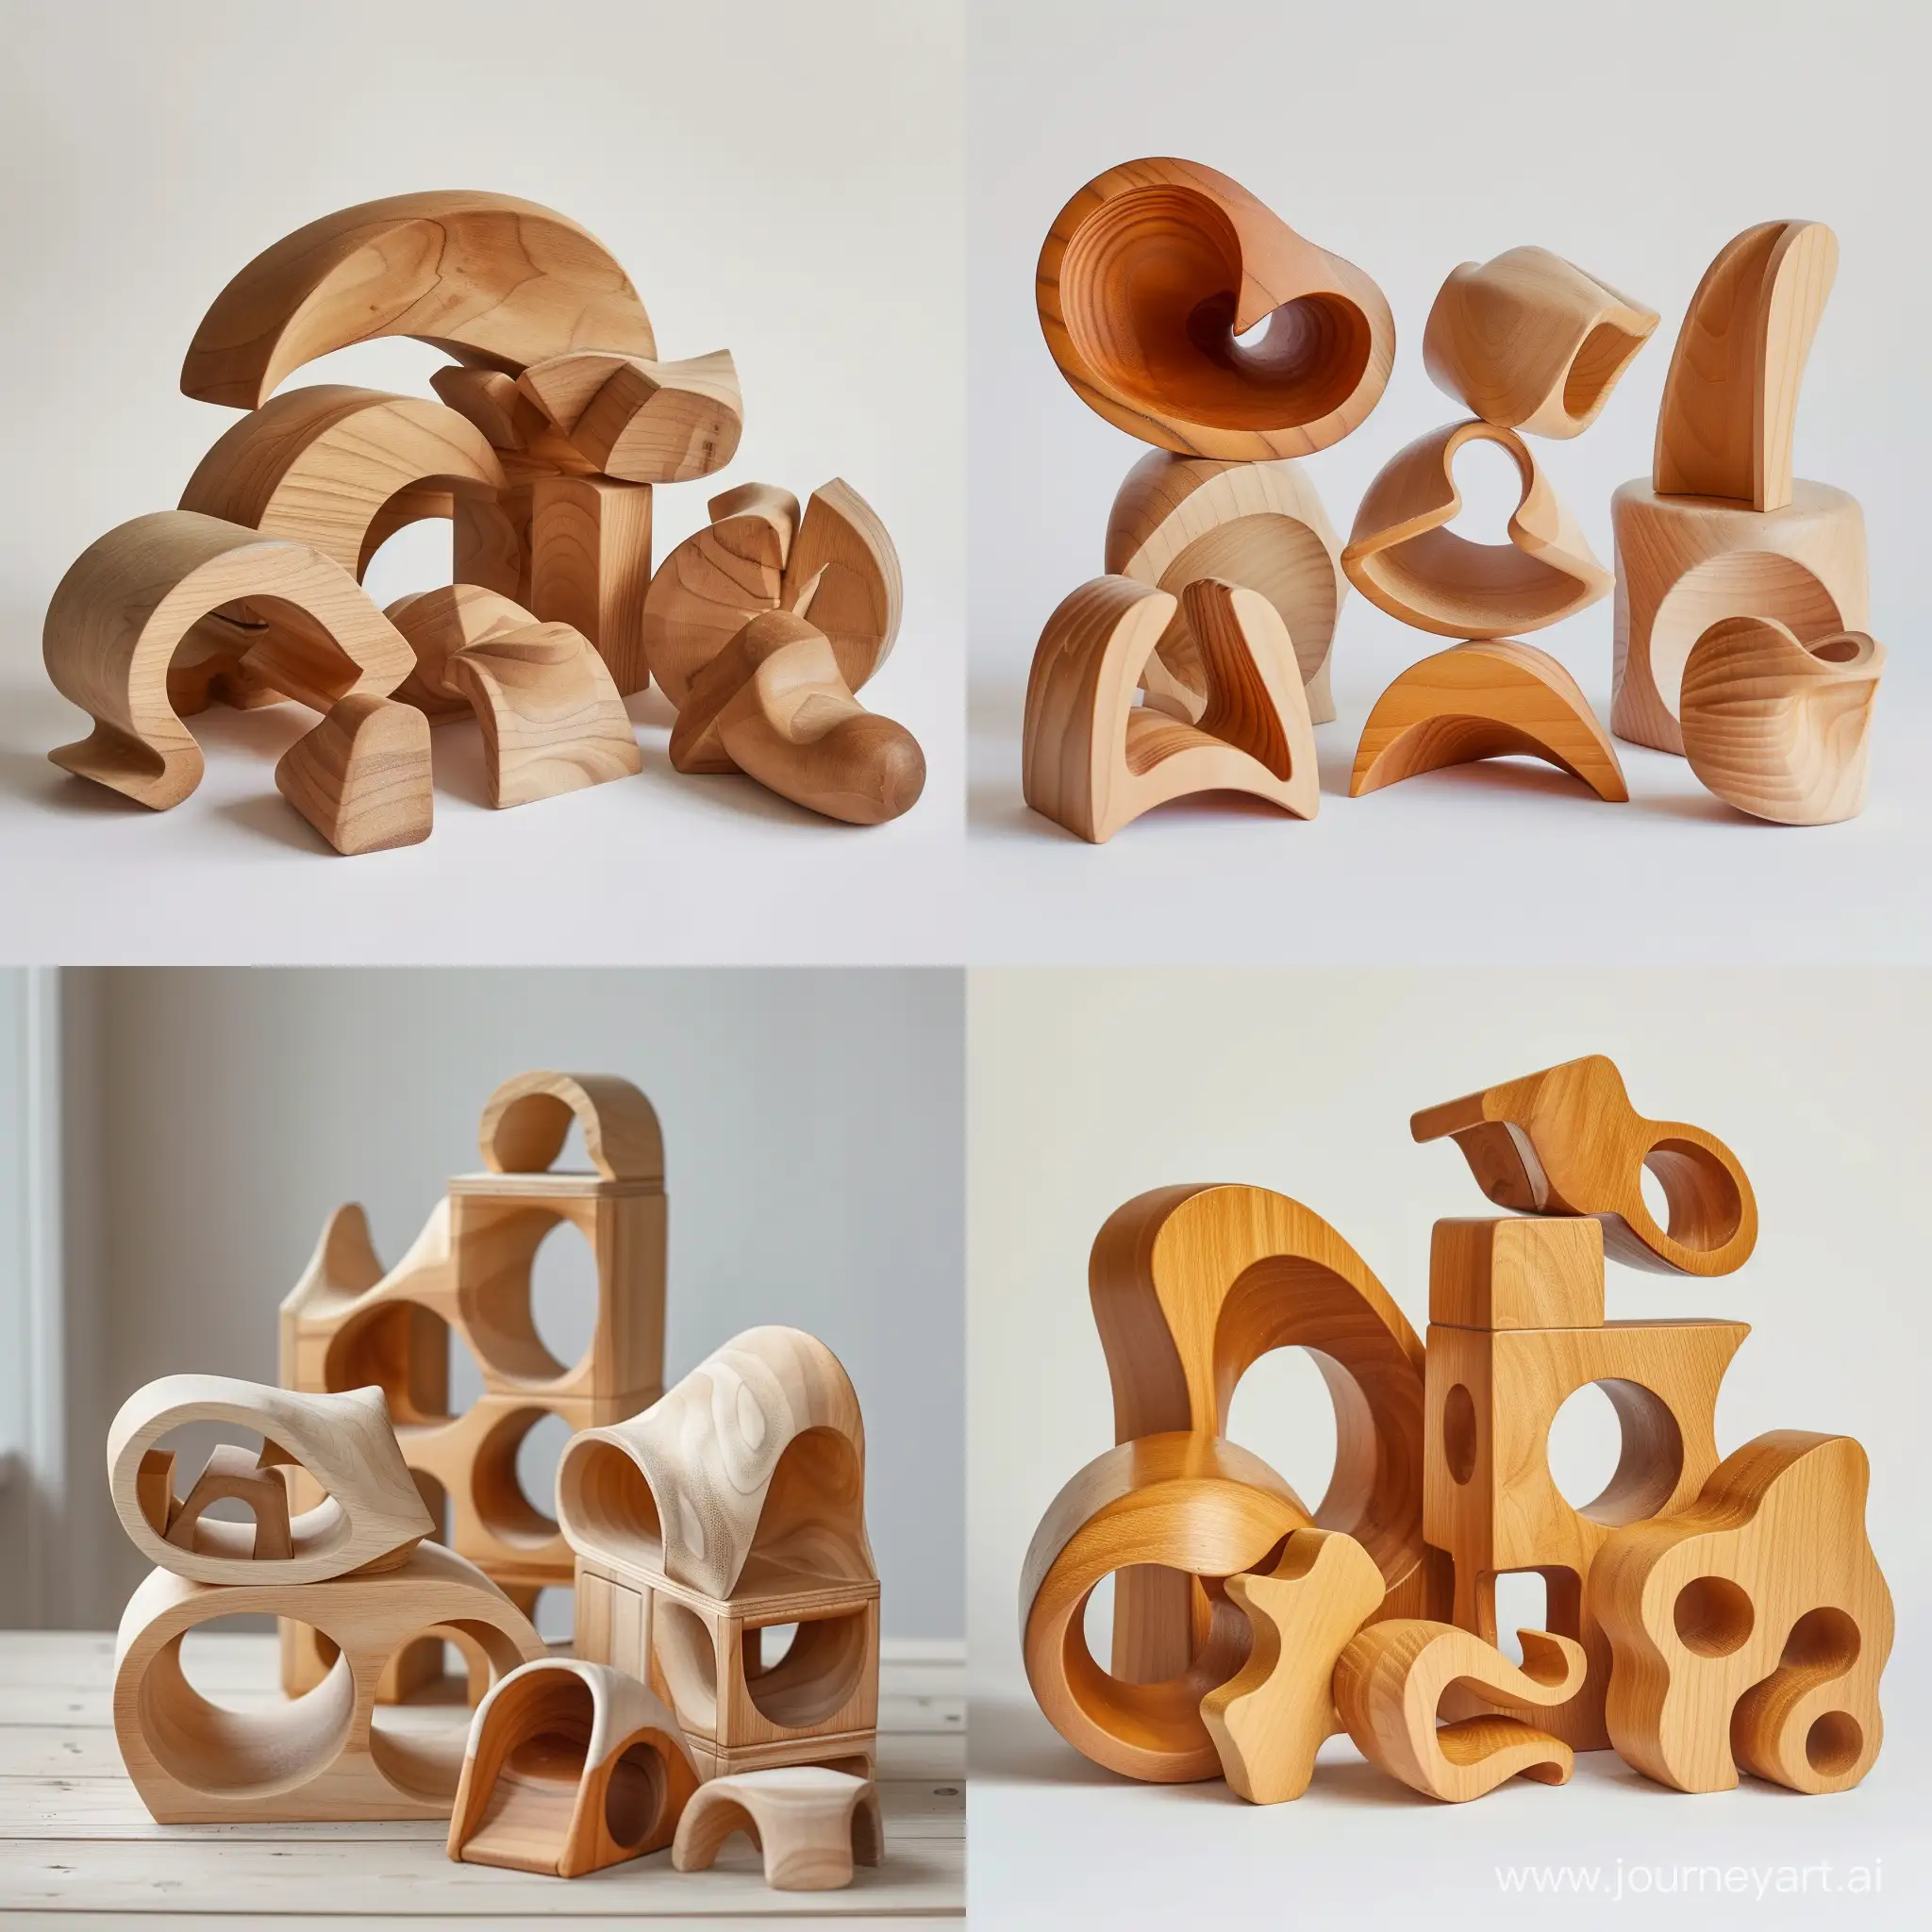 Wooden toys of unusual shape. This is a children's construction kit, but it has few straight lines, many smooth curves. It is very reminiscent of the Bauhaus style.